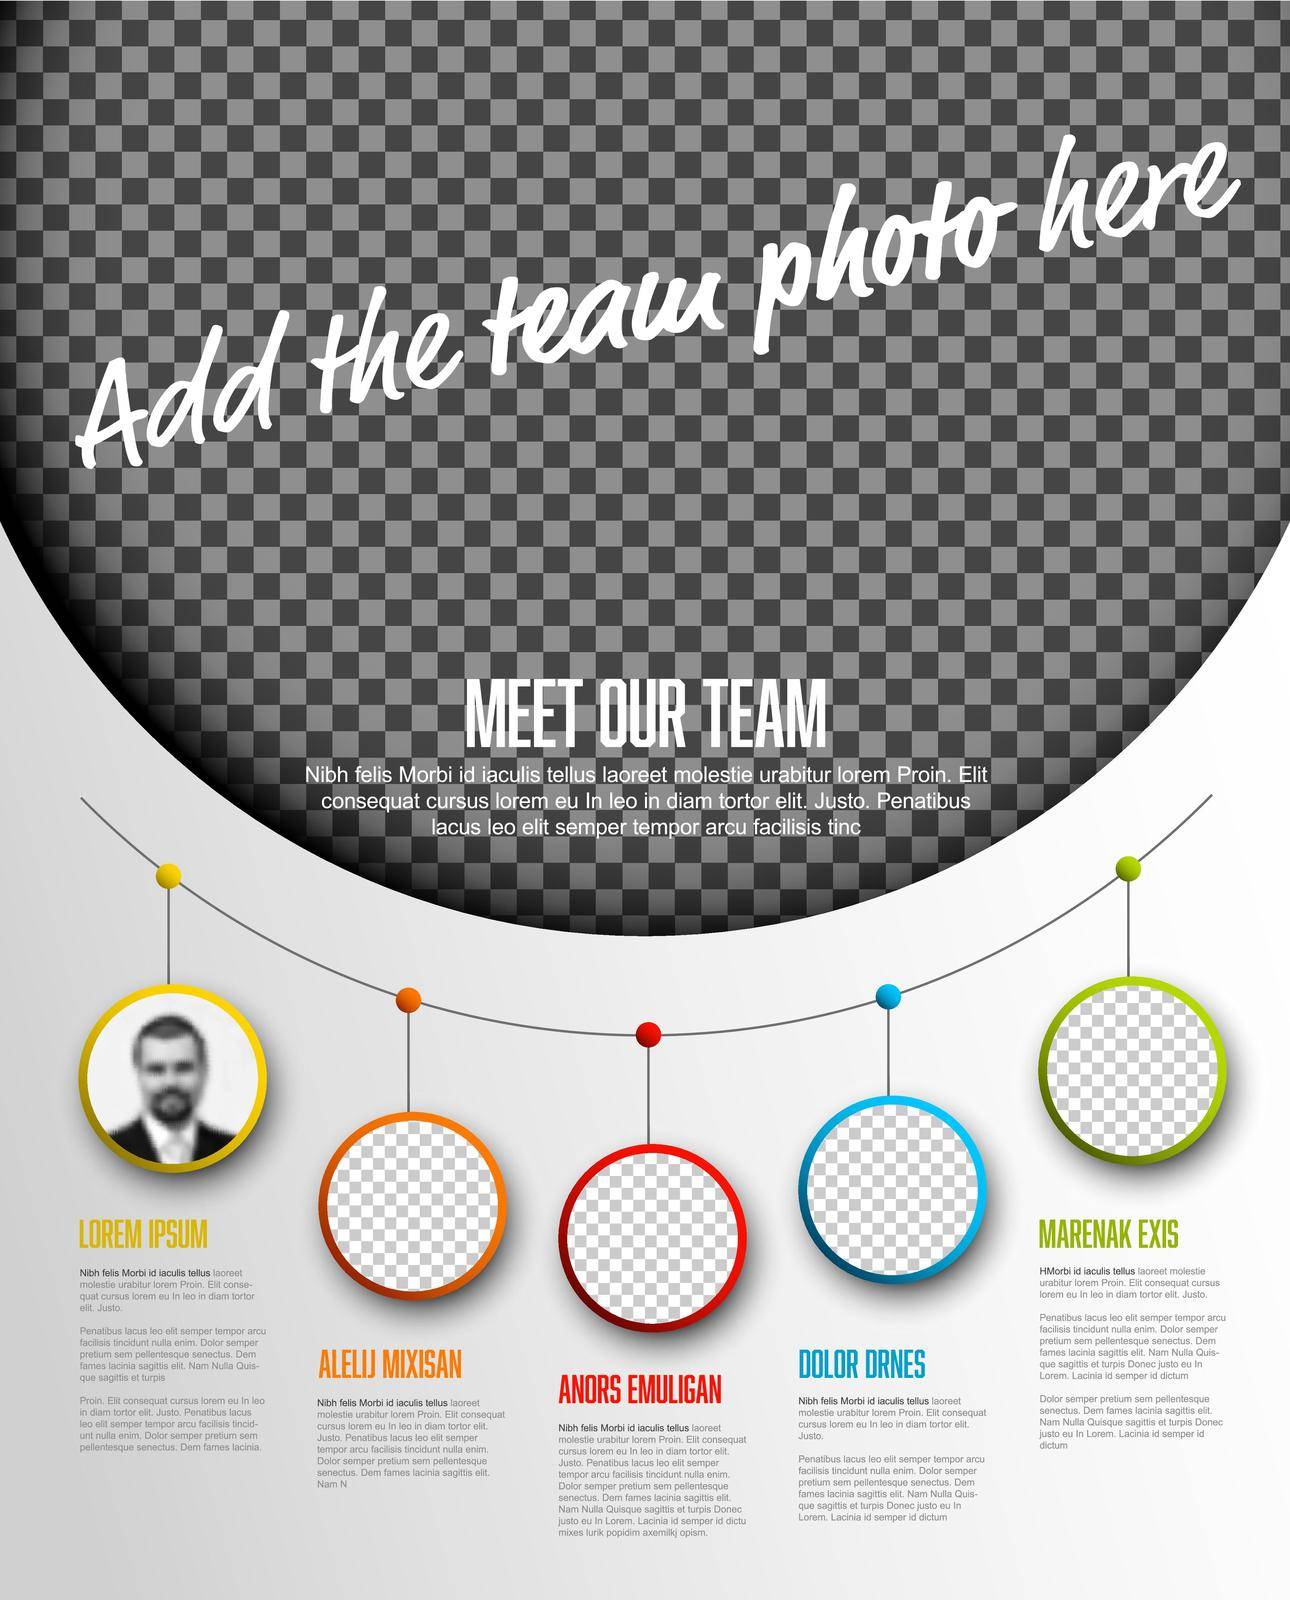 Company team presentation template with big team photo and team profile photos circle placeholders with some sample text about each team member - photo team members placeholders with descriptions